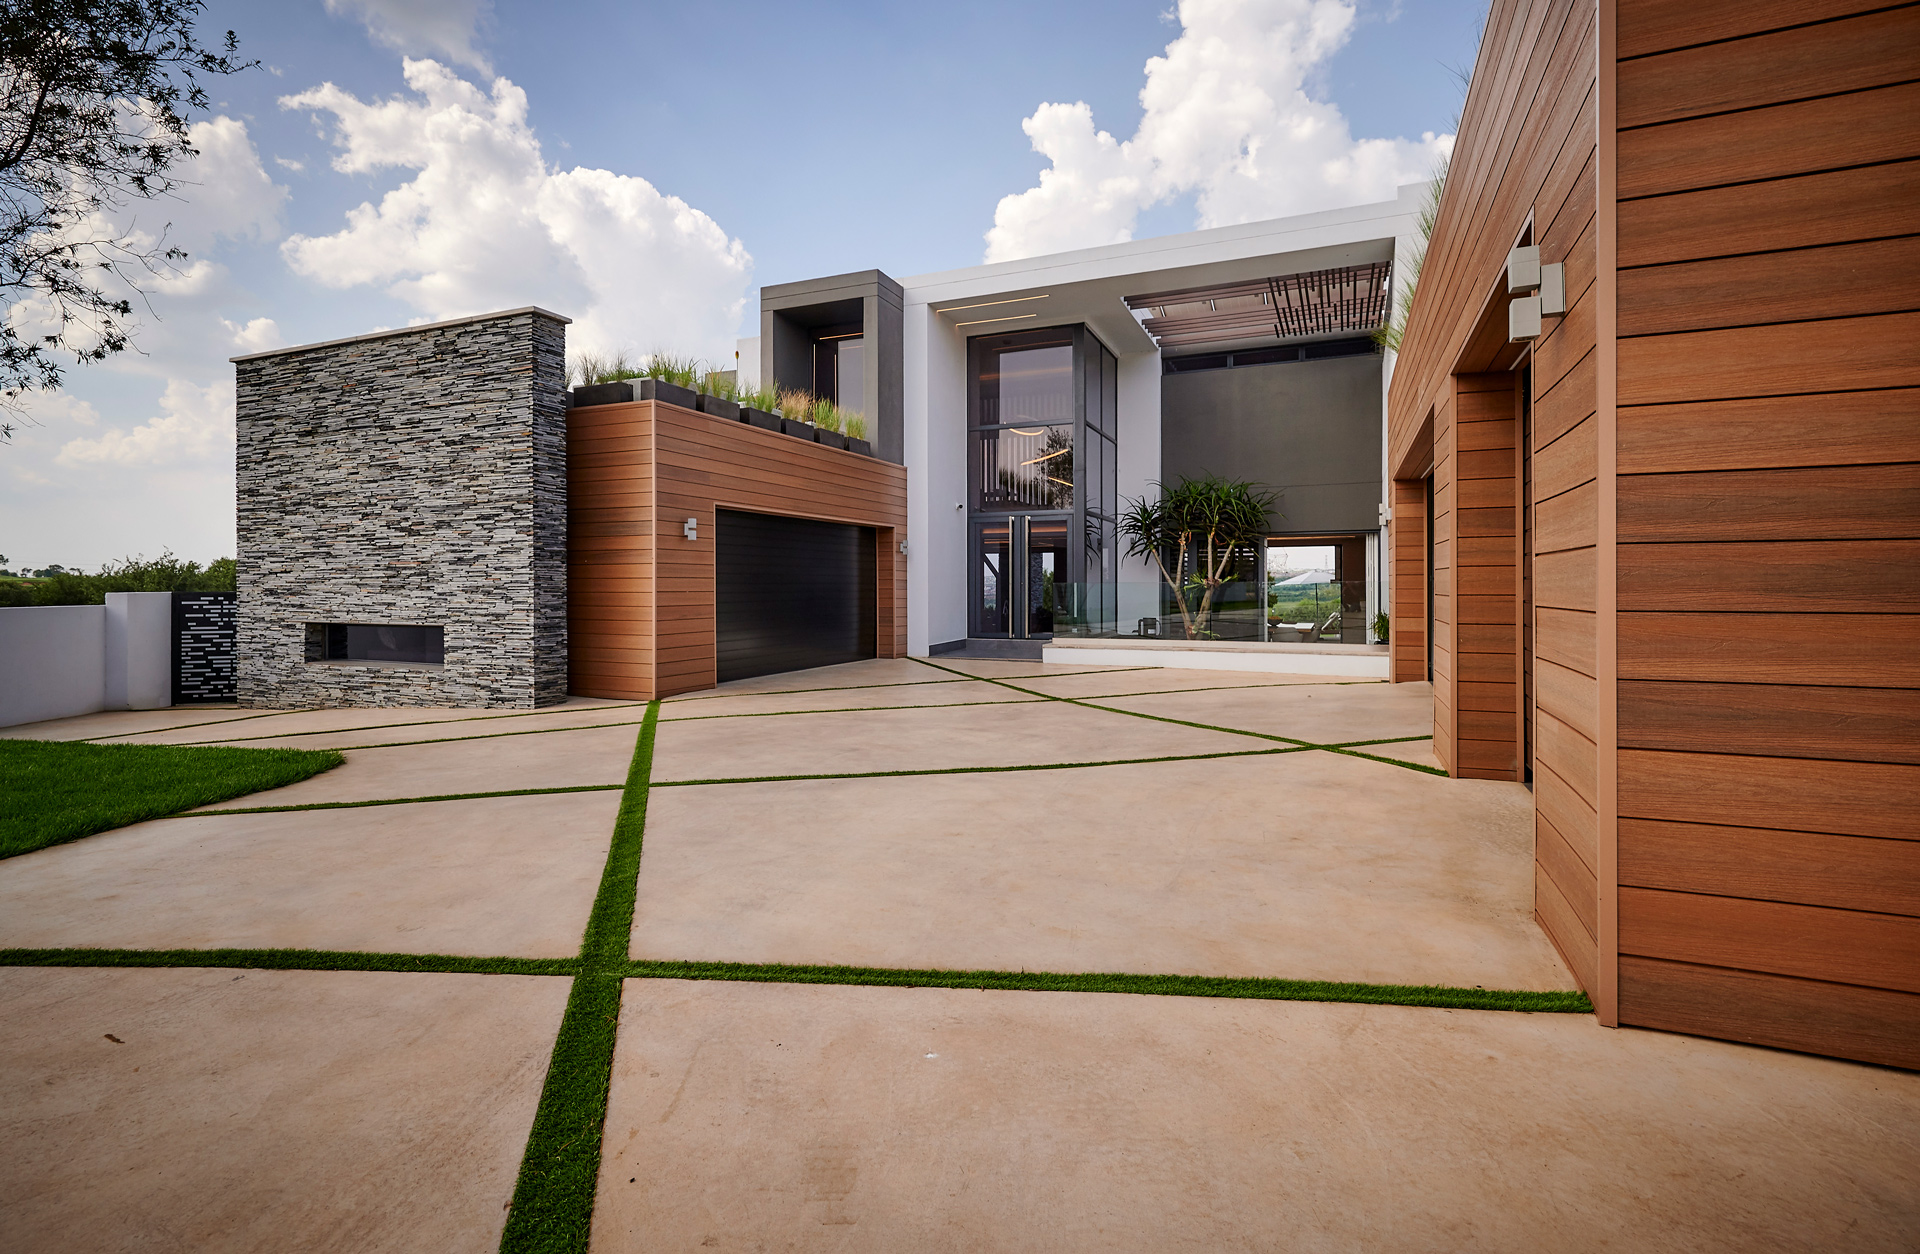 Driveway in front of home with modern wall cladding